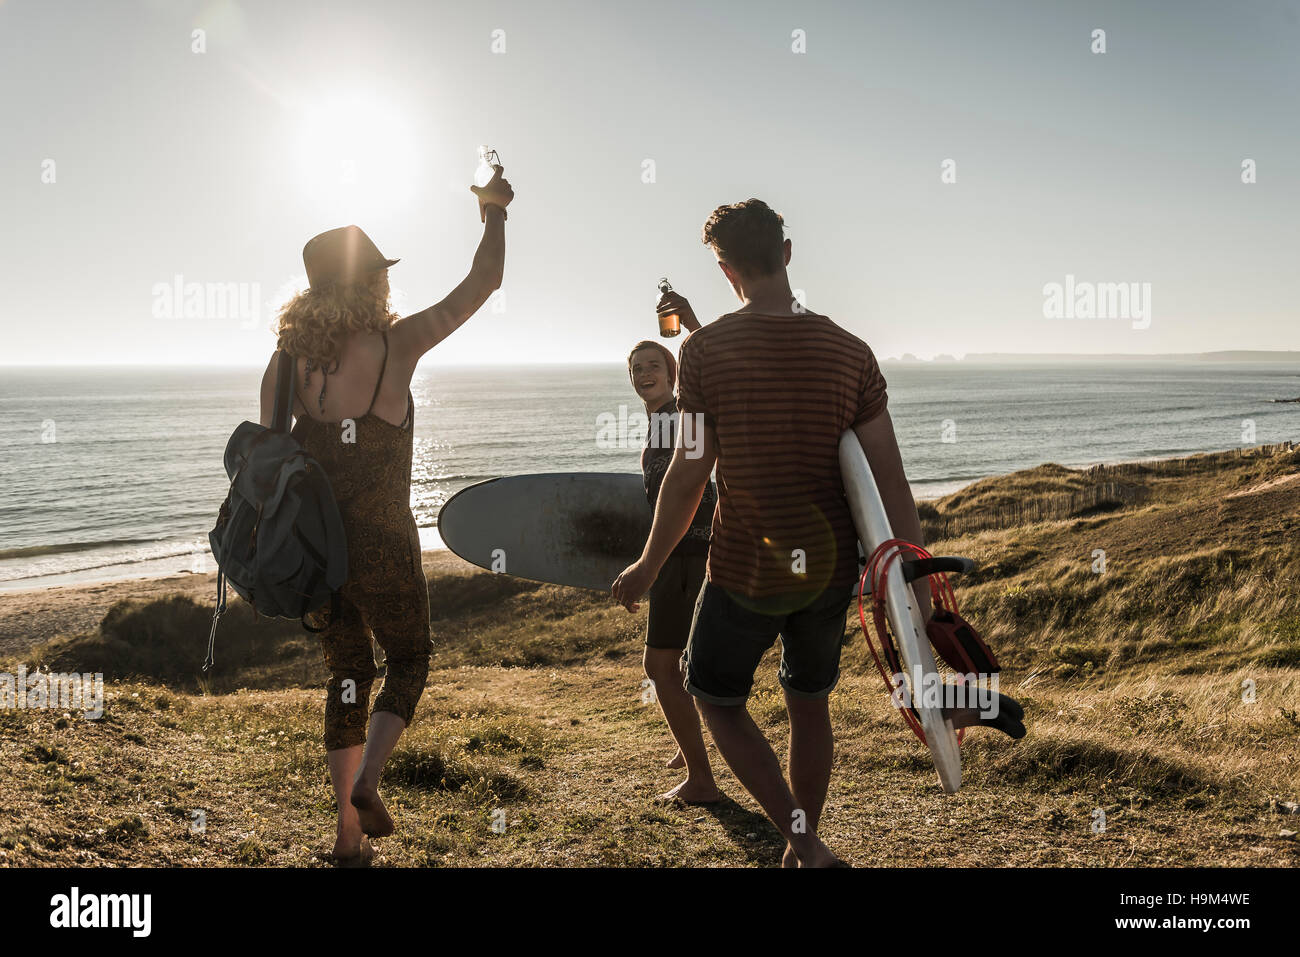 Three friends with surfboards toasting at seaside Stock Photo